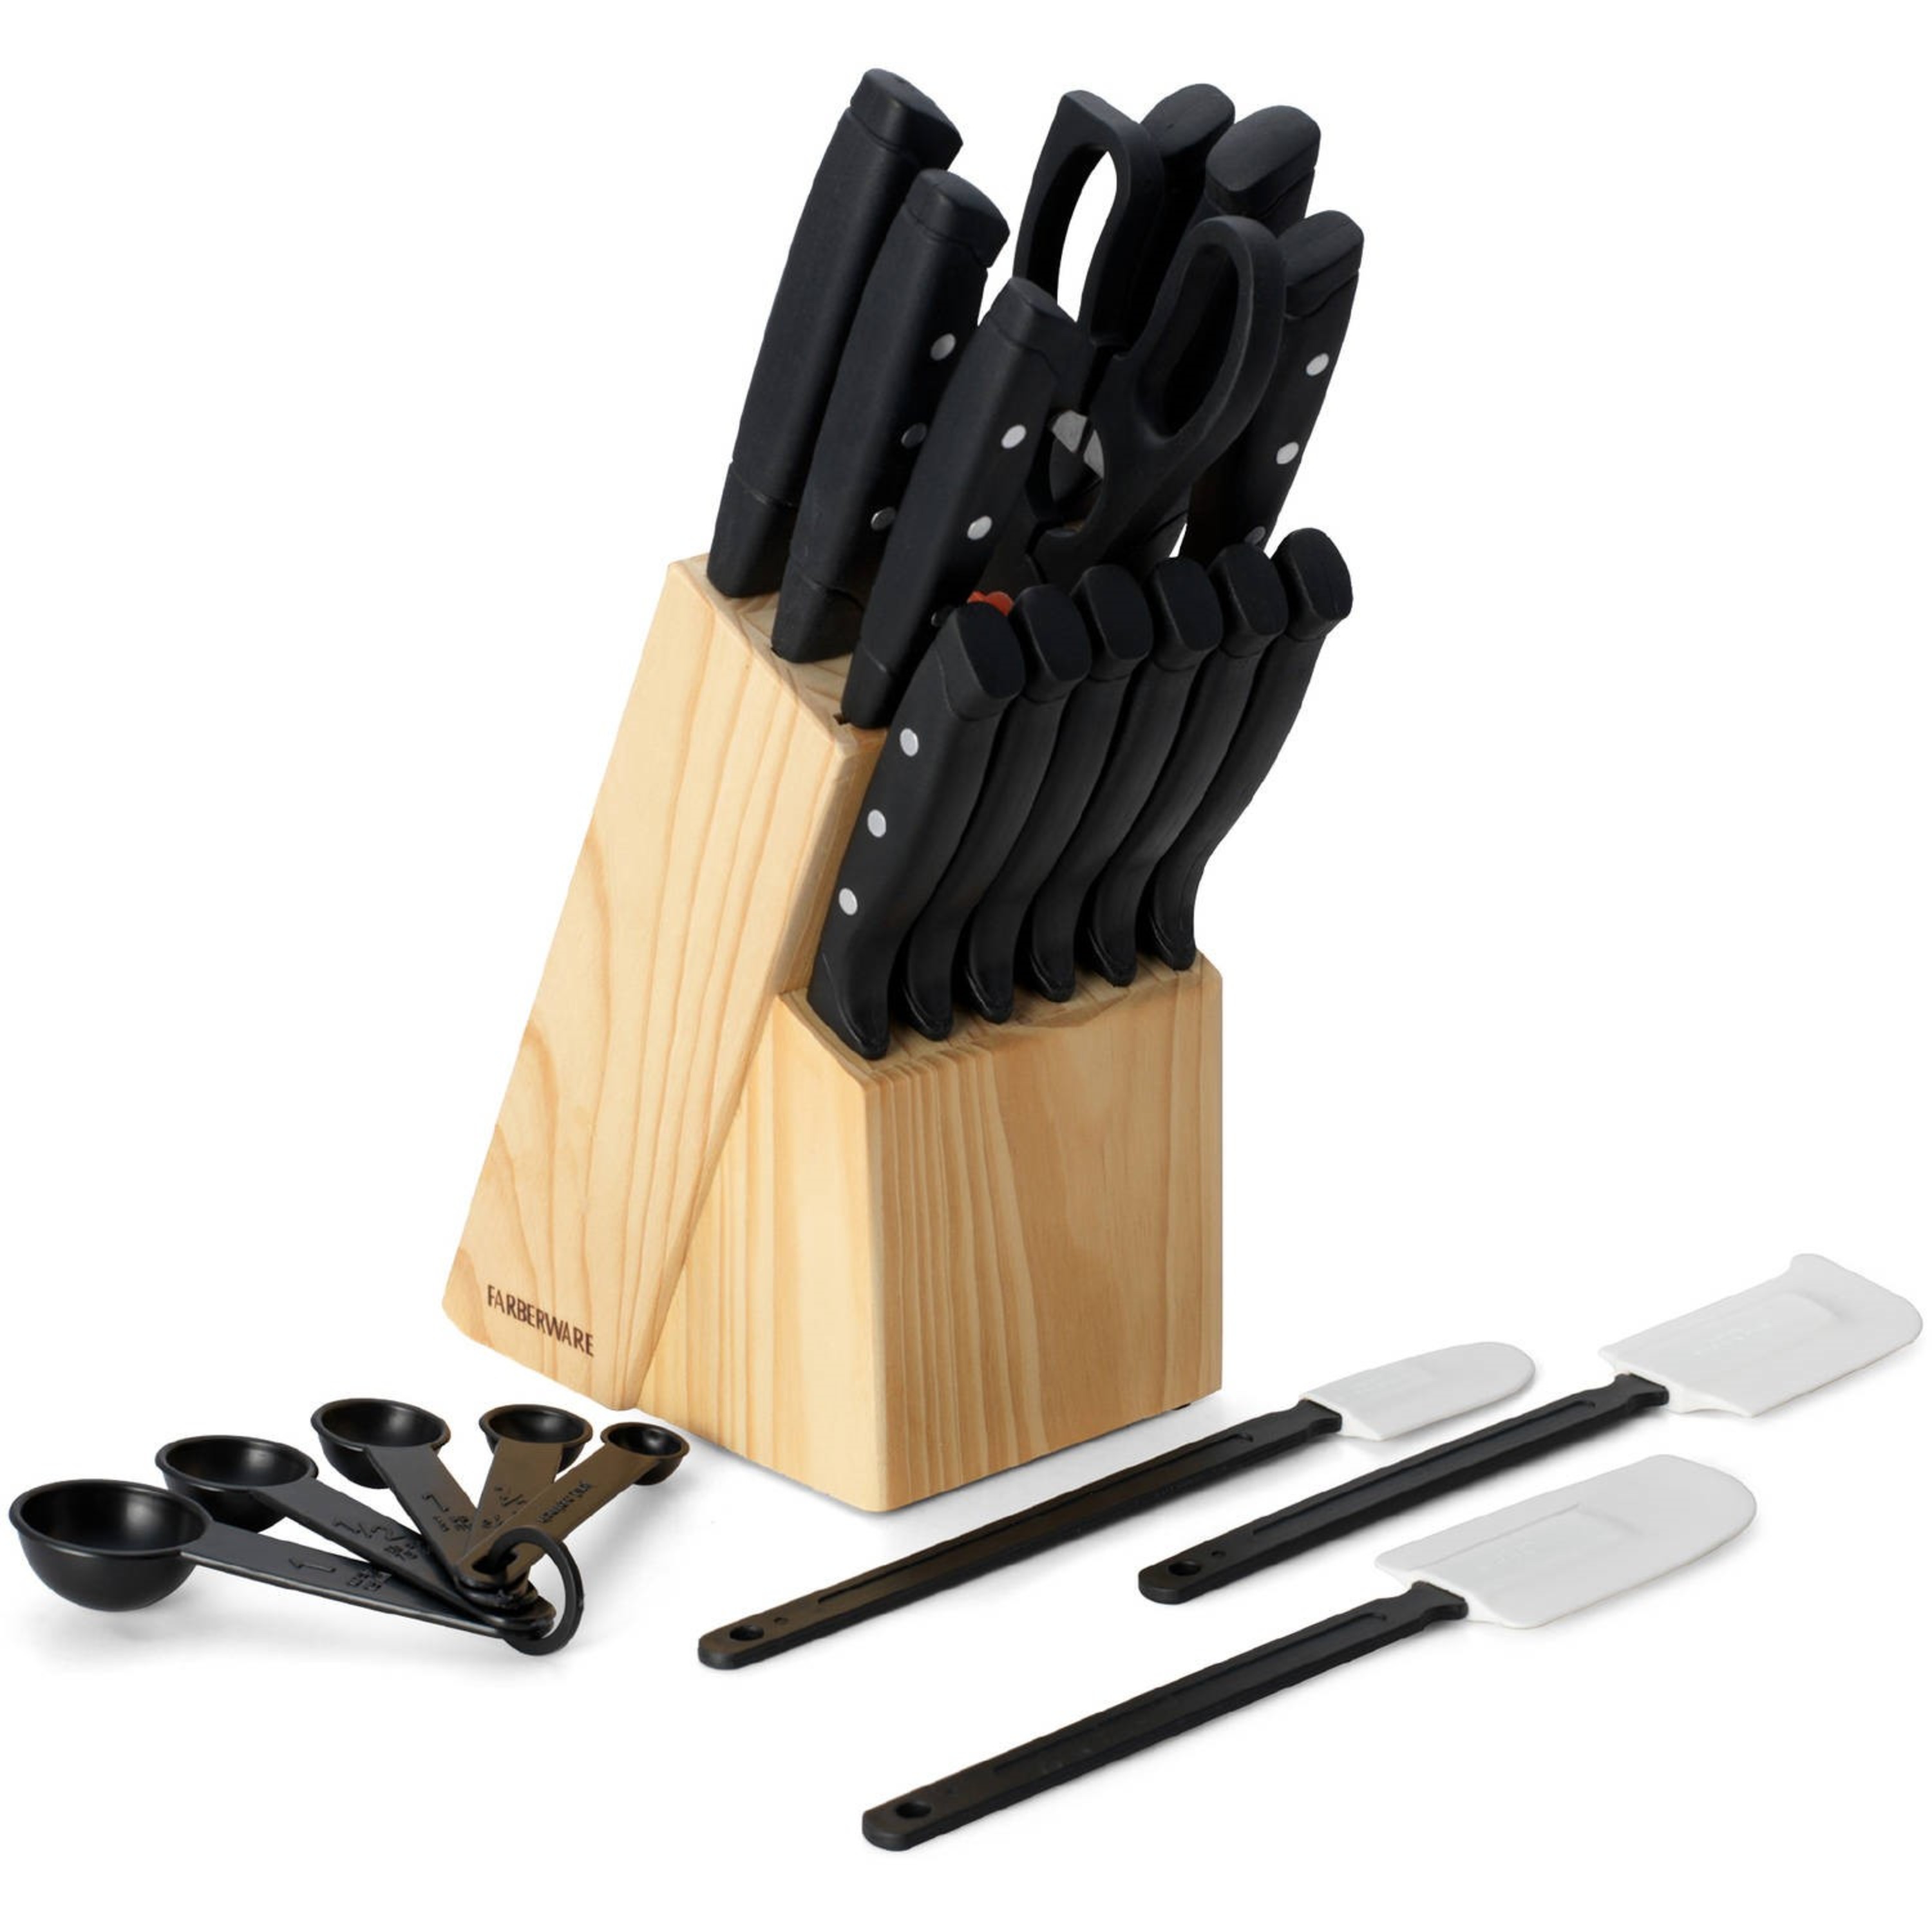 Farberware 22-Piece Never Needs Sharpening Stainless Steel Knife Set with Block Black - image 1 of 6